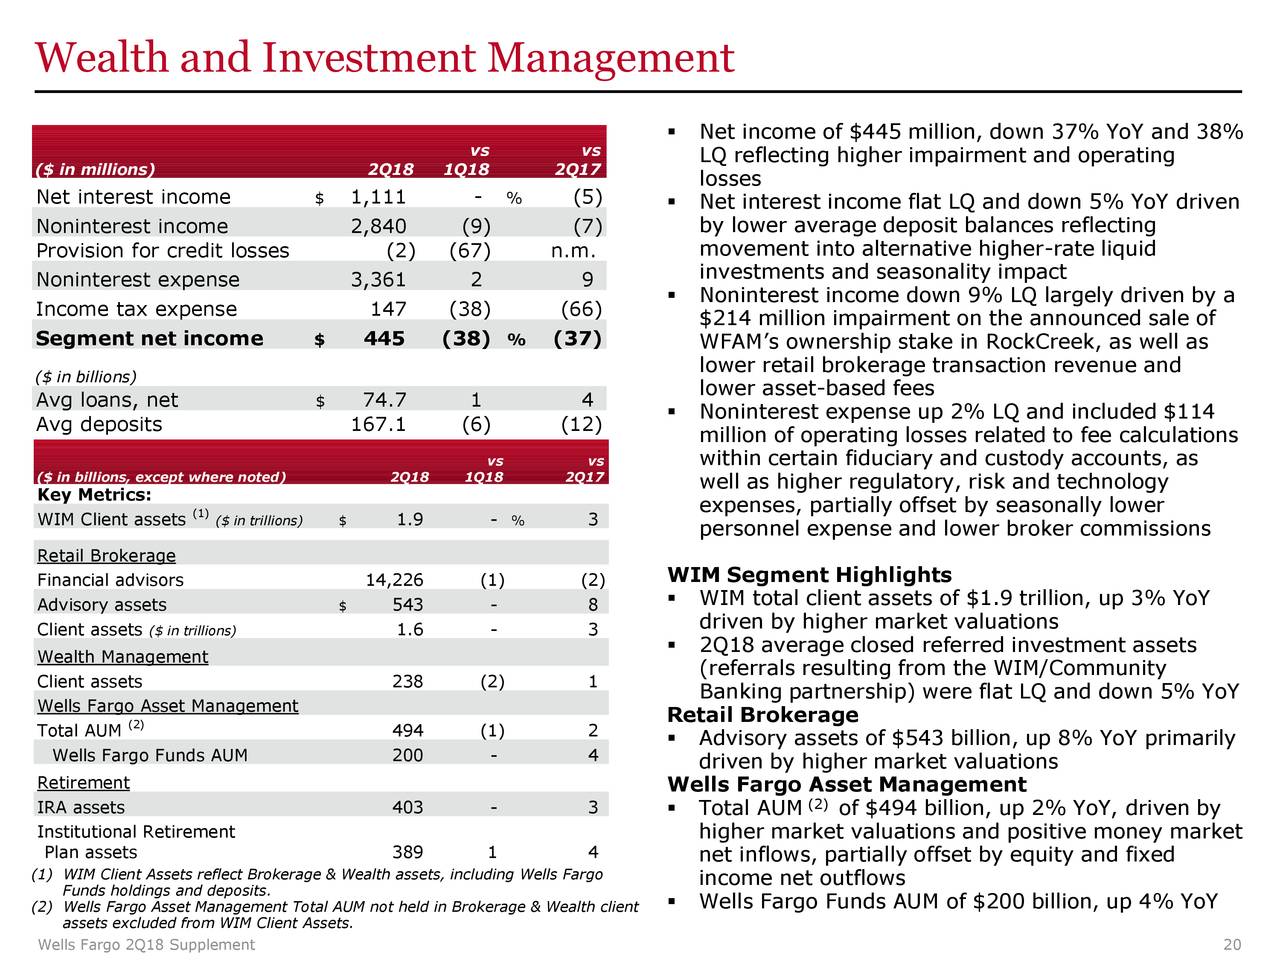 Wealth and Investment Management